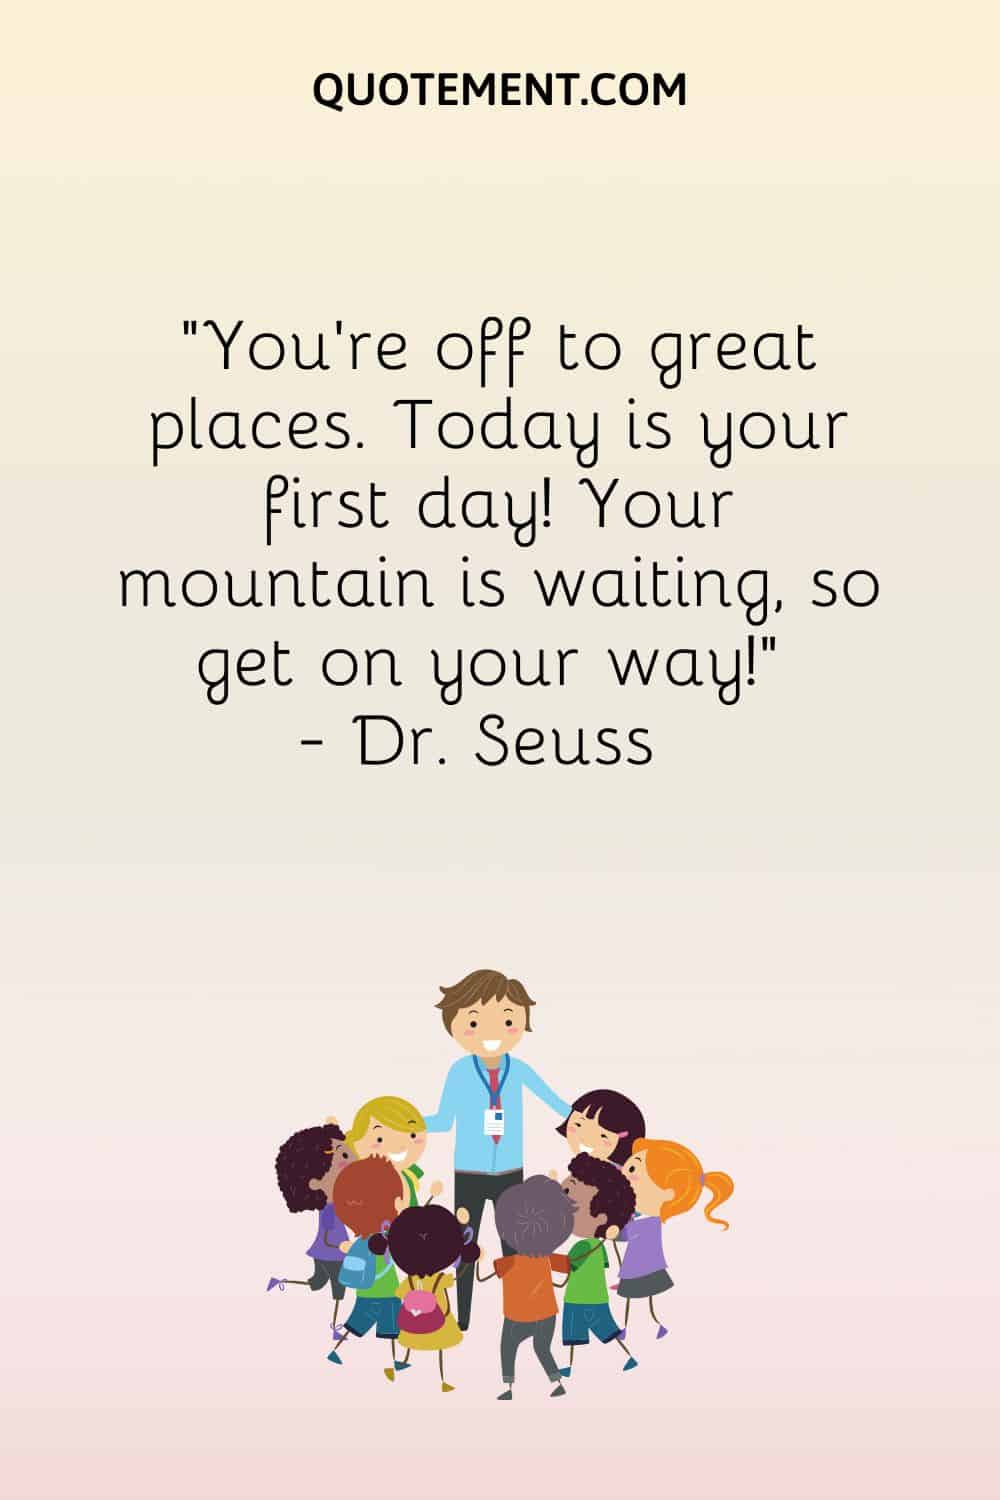 You’re off to great places. Today is your first day